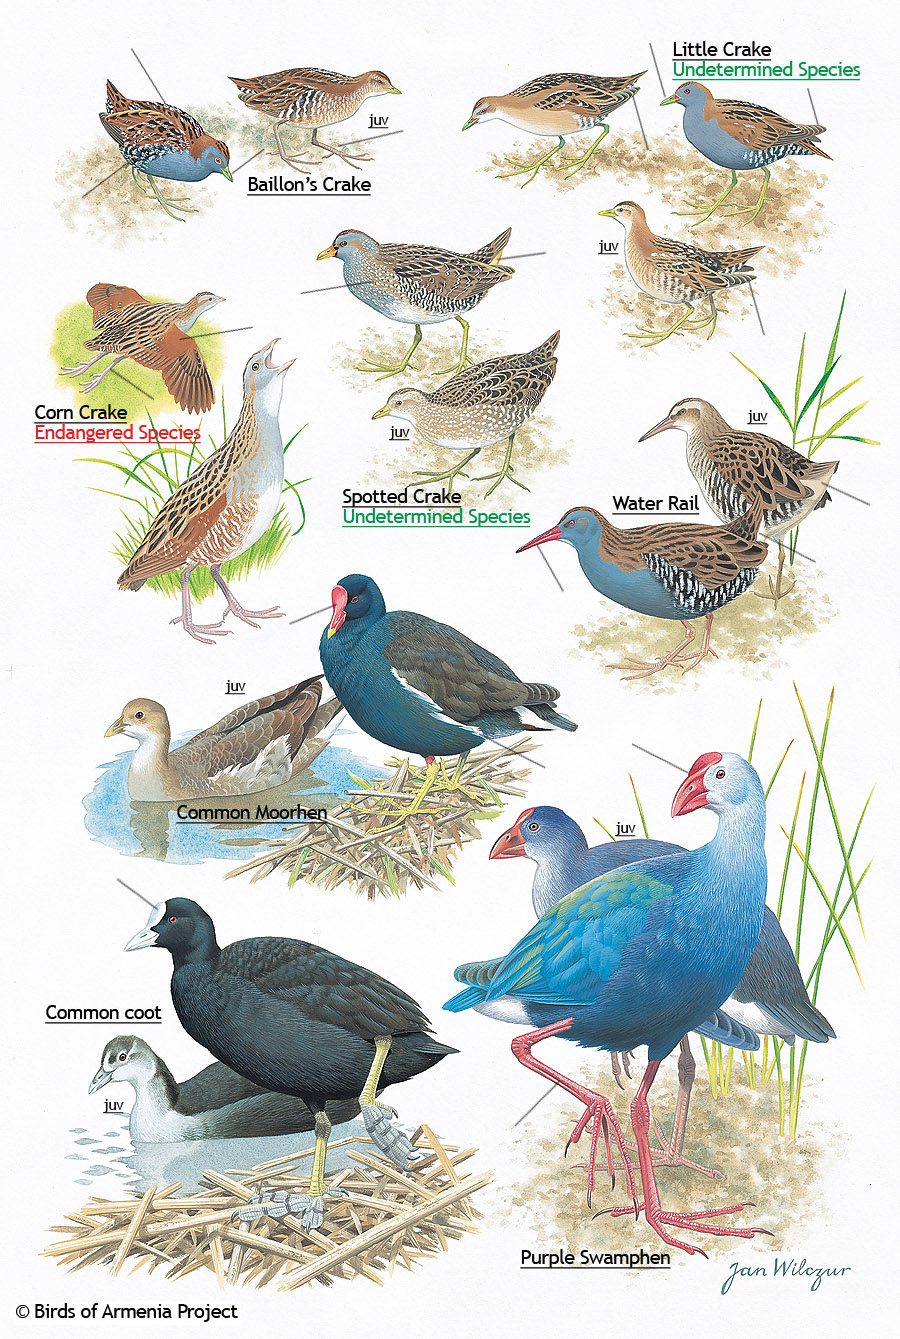 Crakes, Rails, Moorhens, Coots and Swamphens